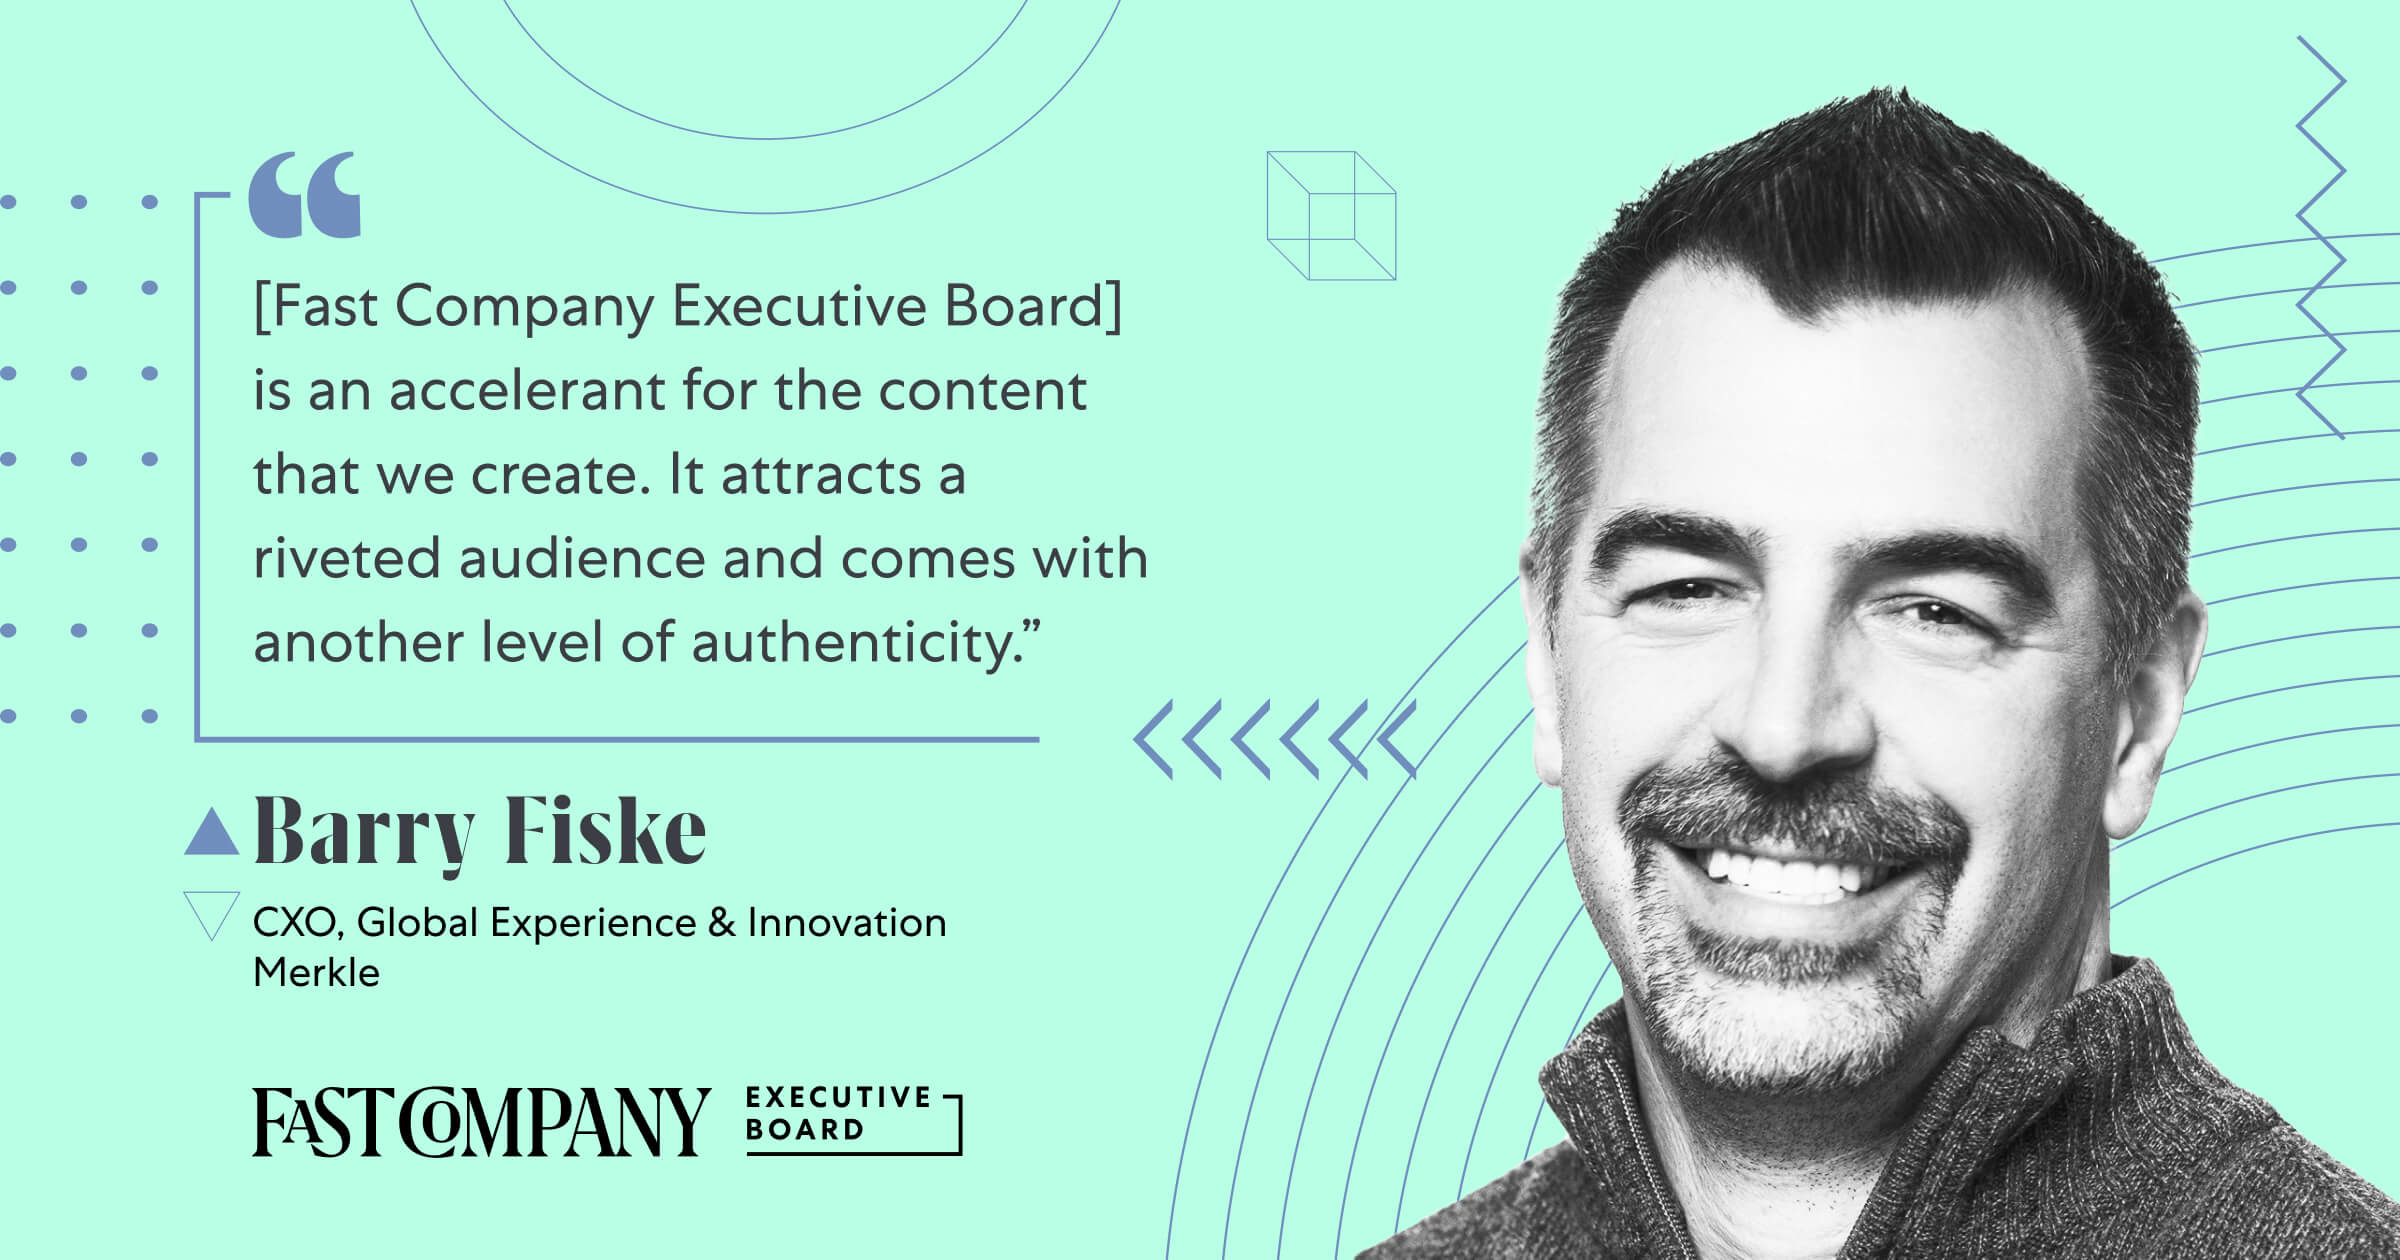 Fast Company Executive Board Connects Barry Fiske With a Riveted Audience